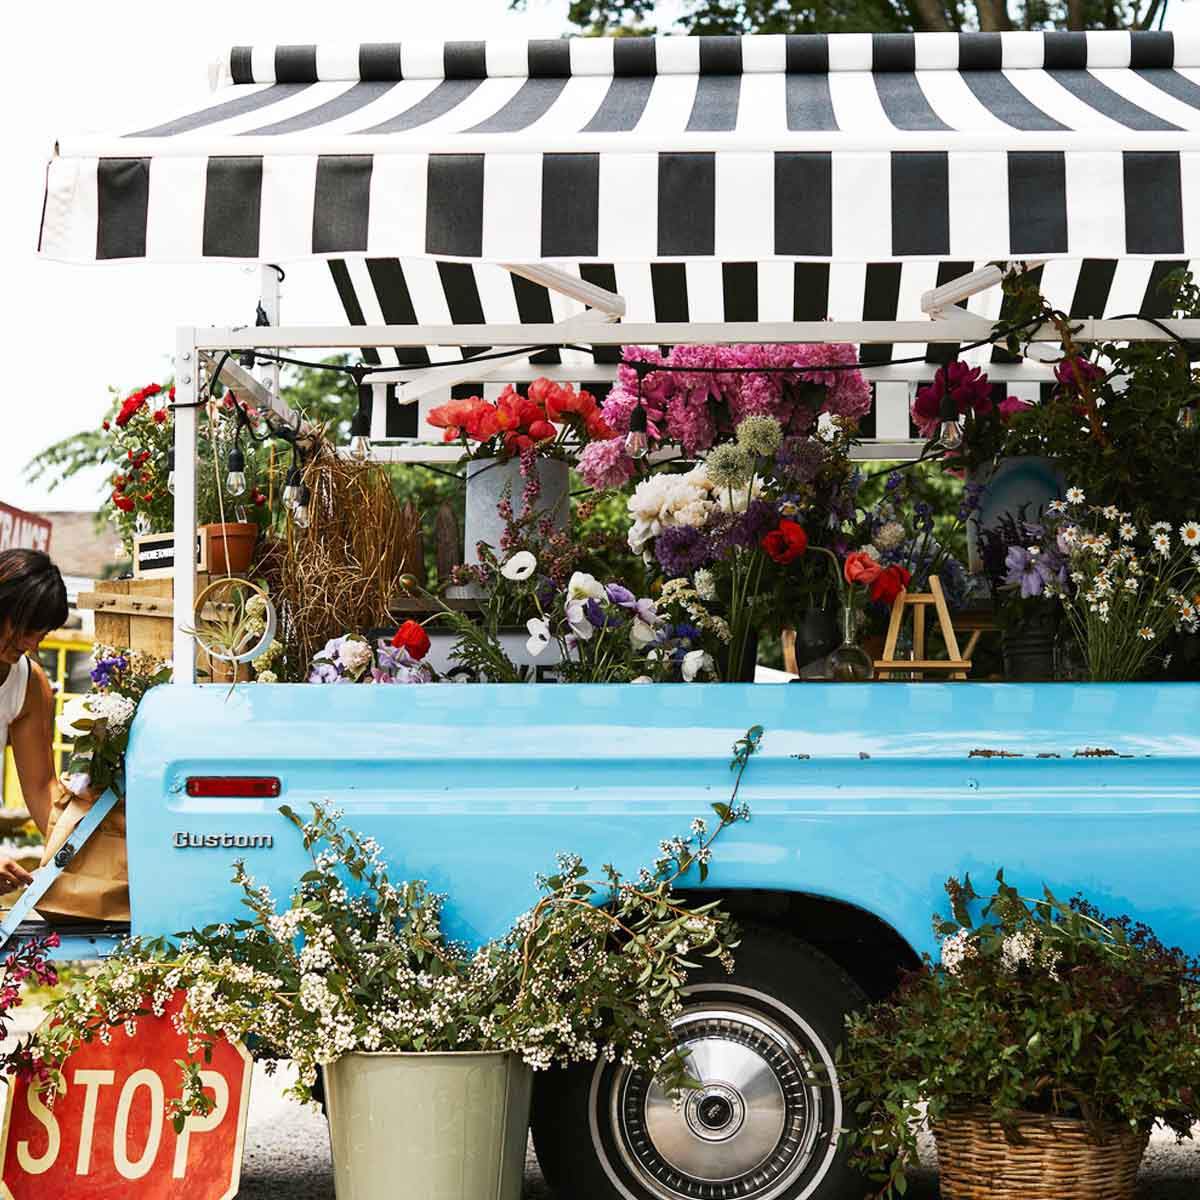 the-flower-truck-in-long-island-you-dont-wanna-miss-featured